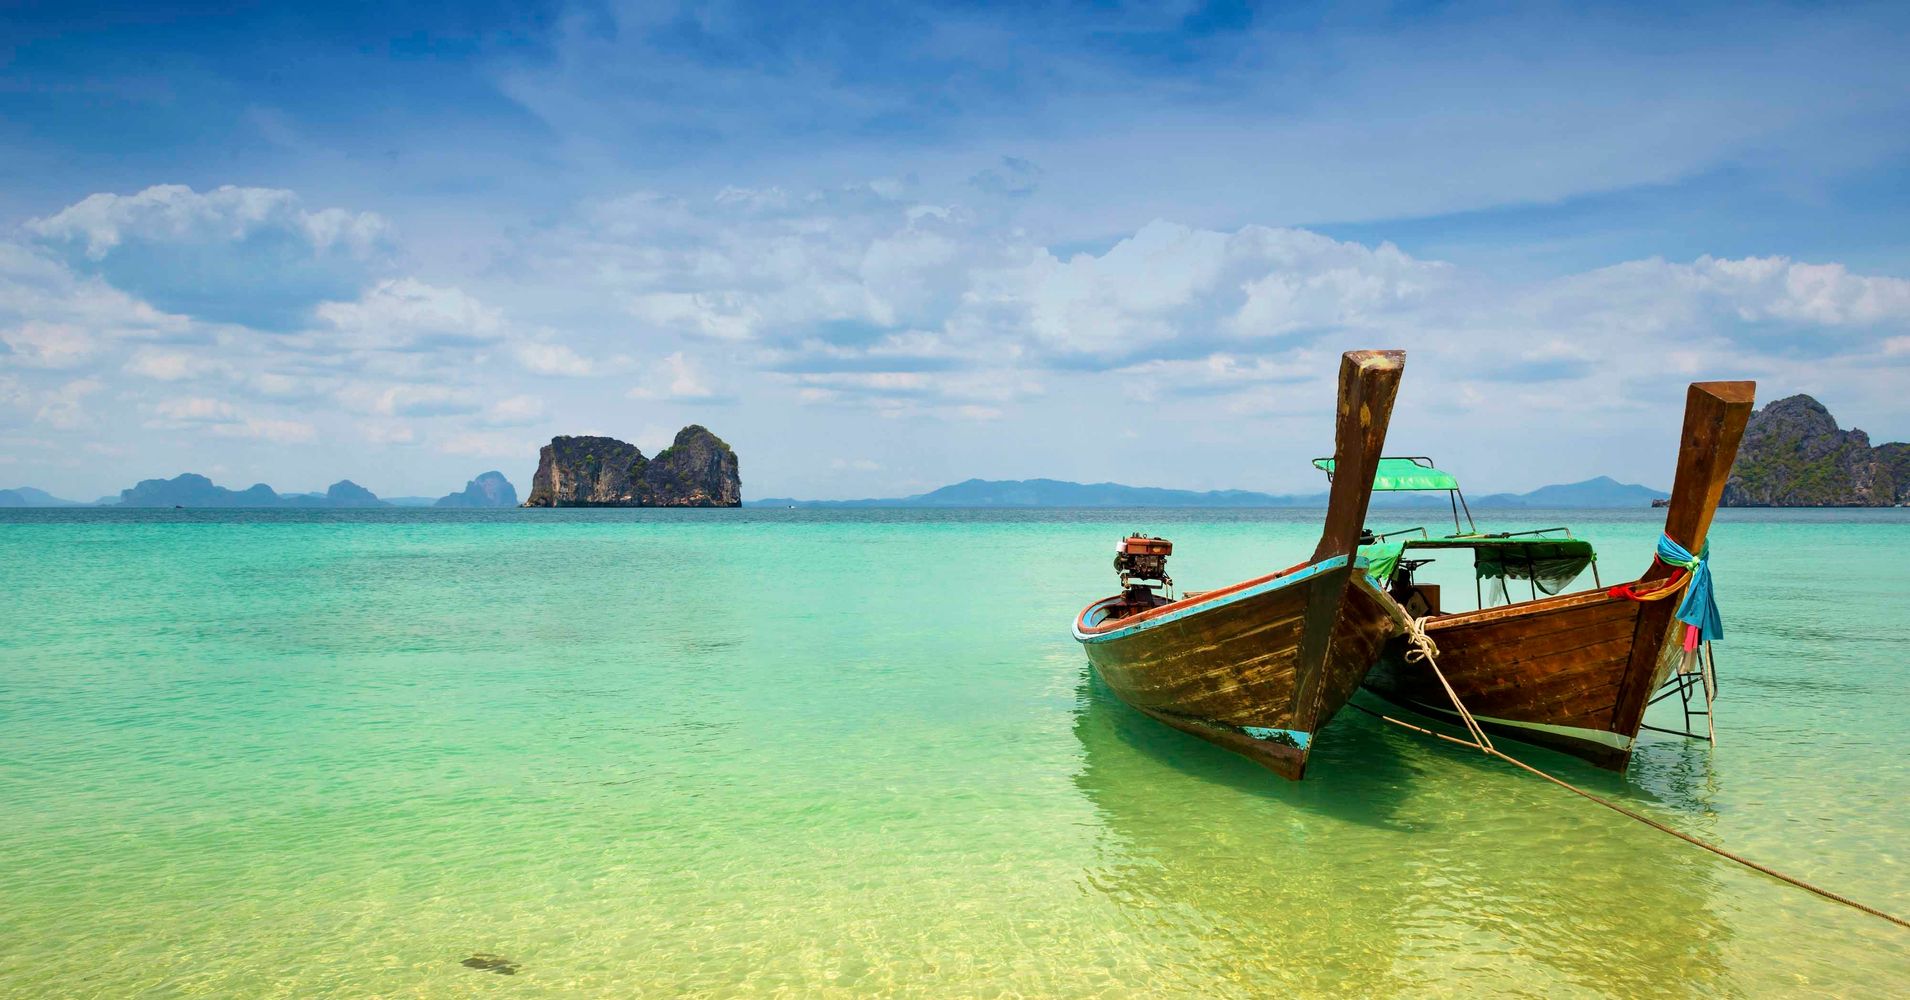 10 Best Places To Travel In Asia According To Lonely Planet Huffpost